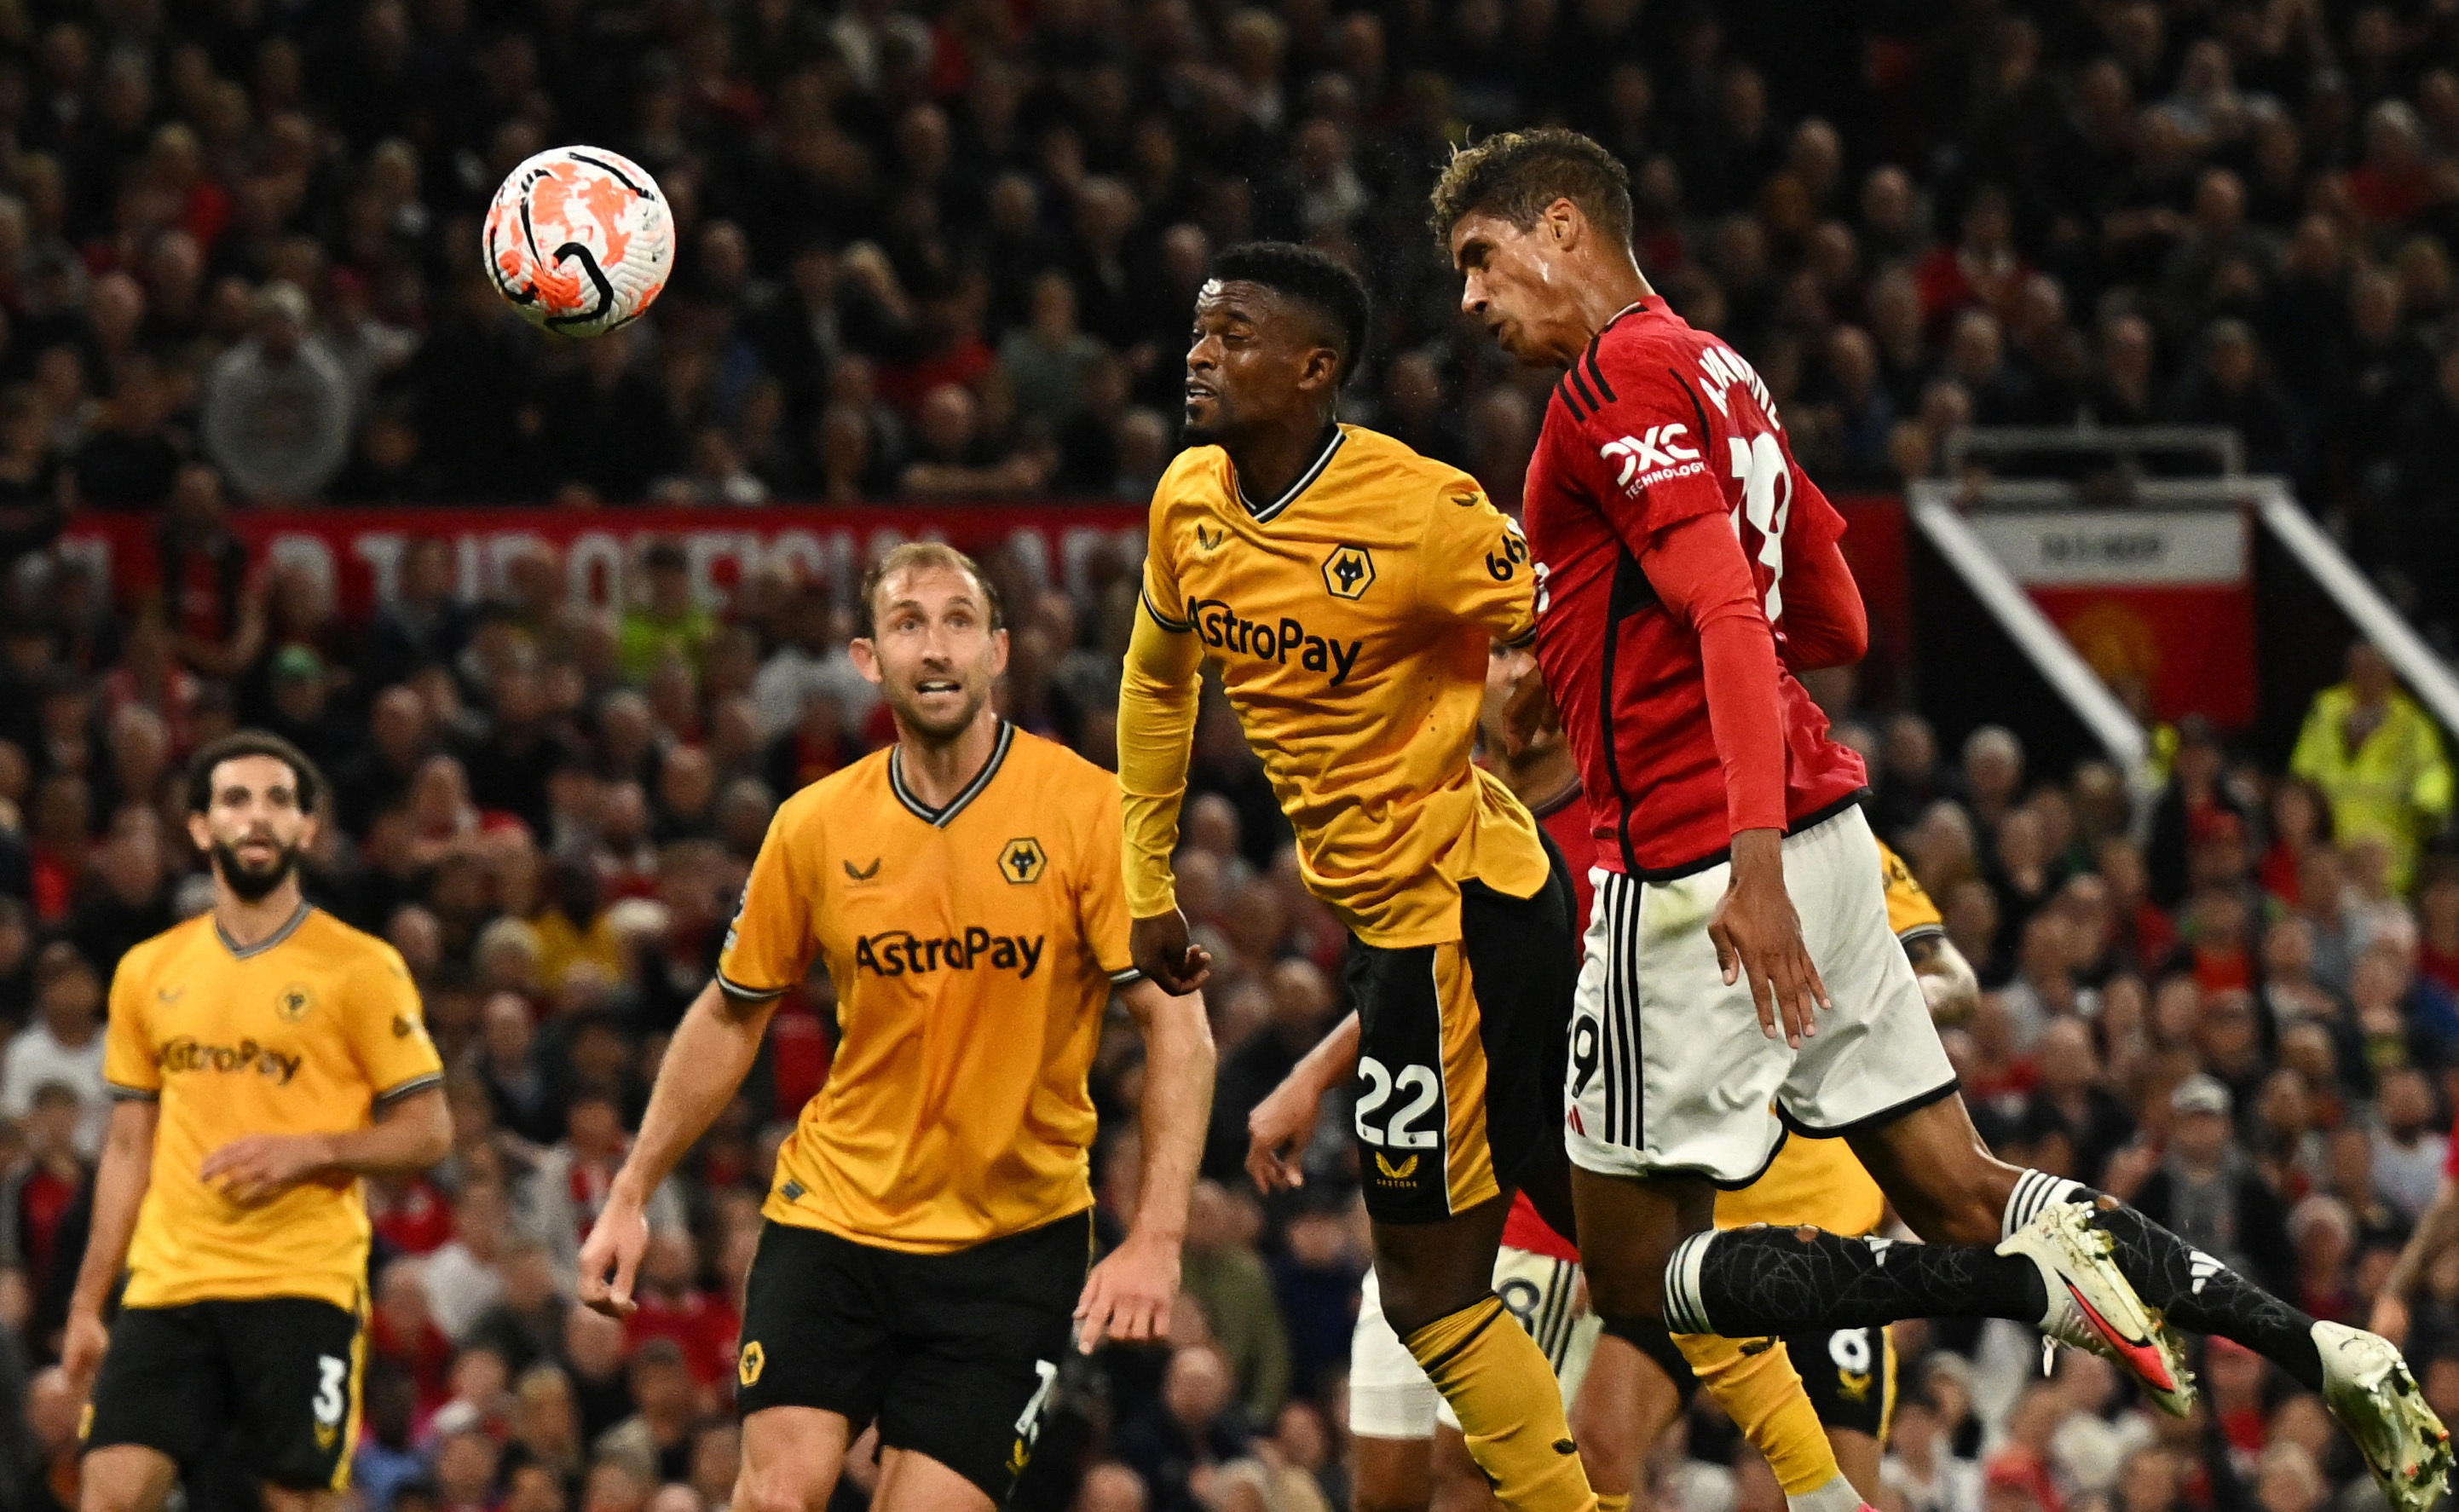 Wolves rue penalty decision as Ten Hag hails United's fighting spirit ...